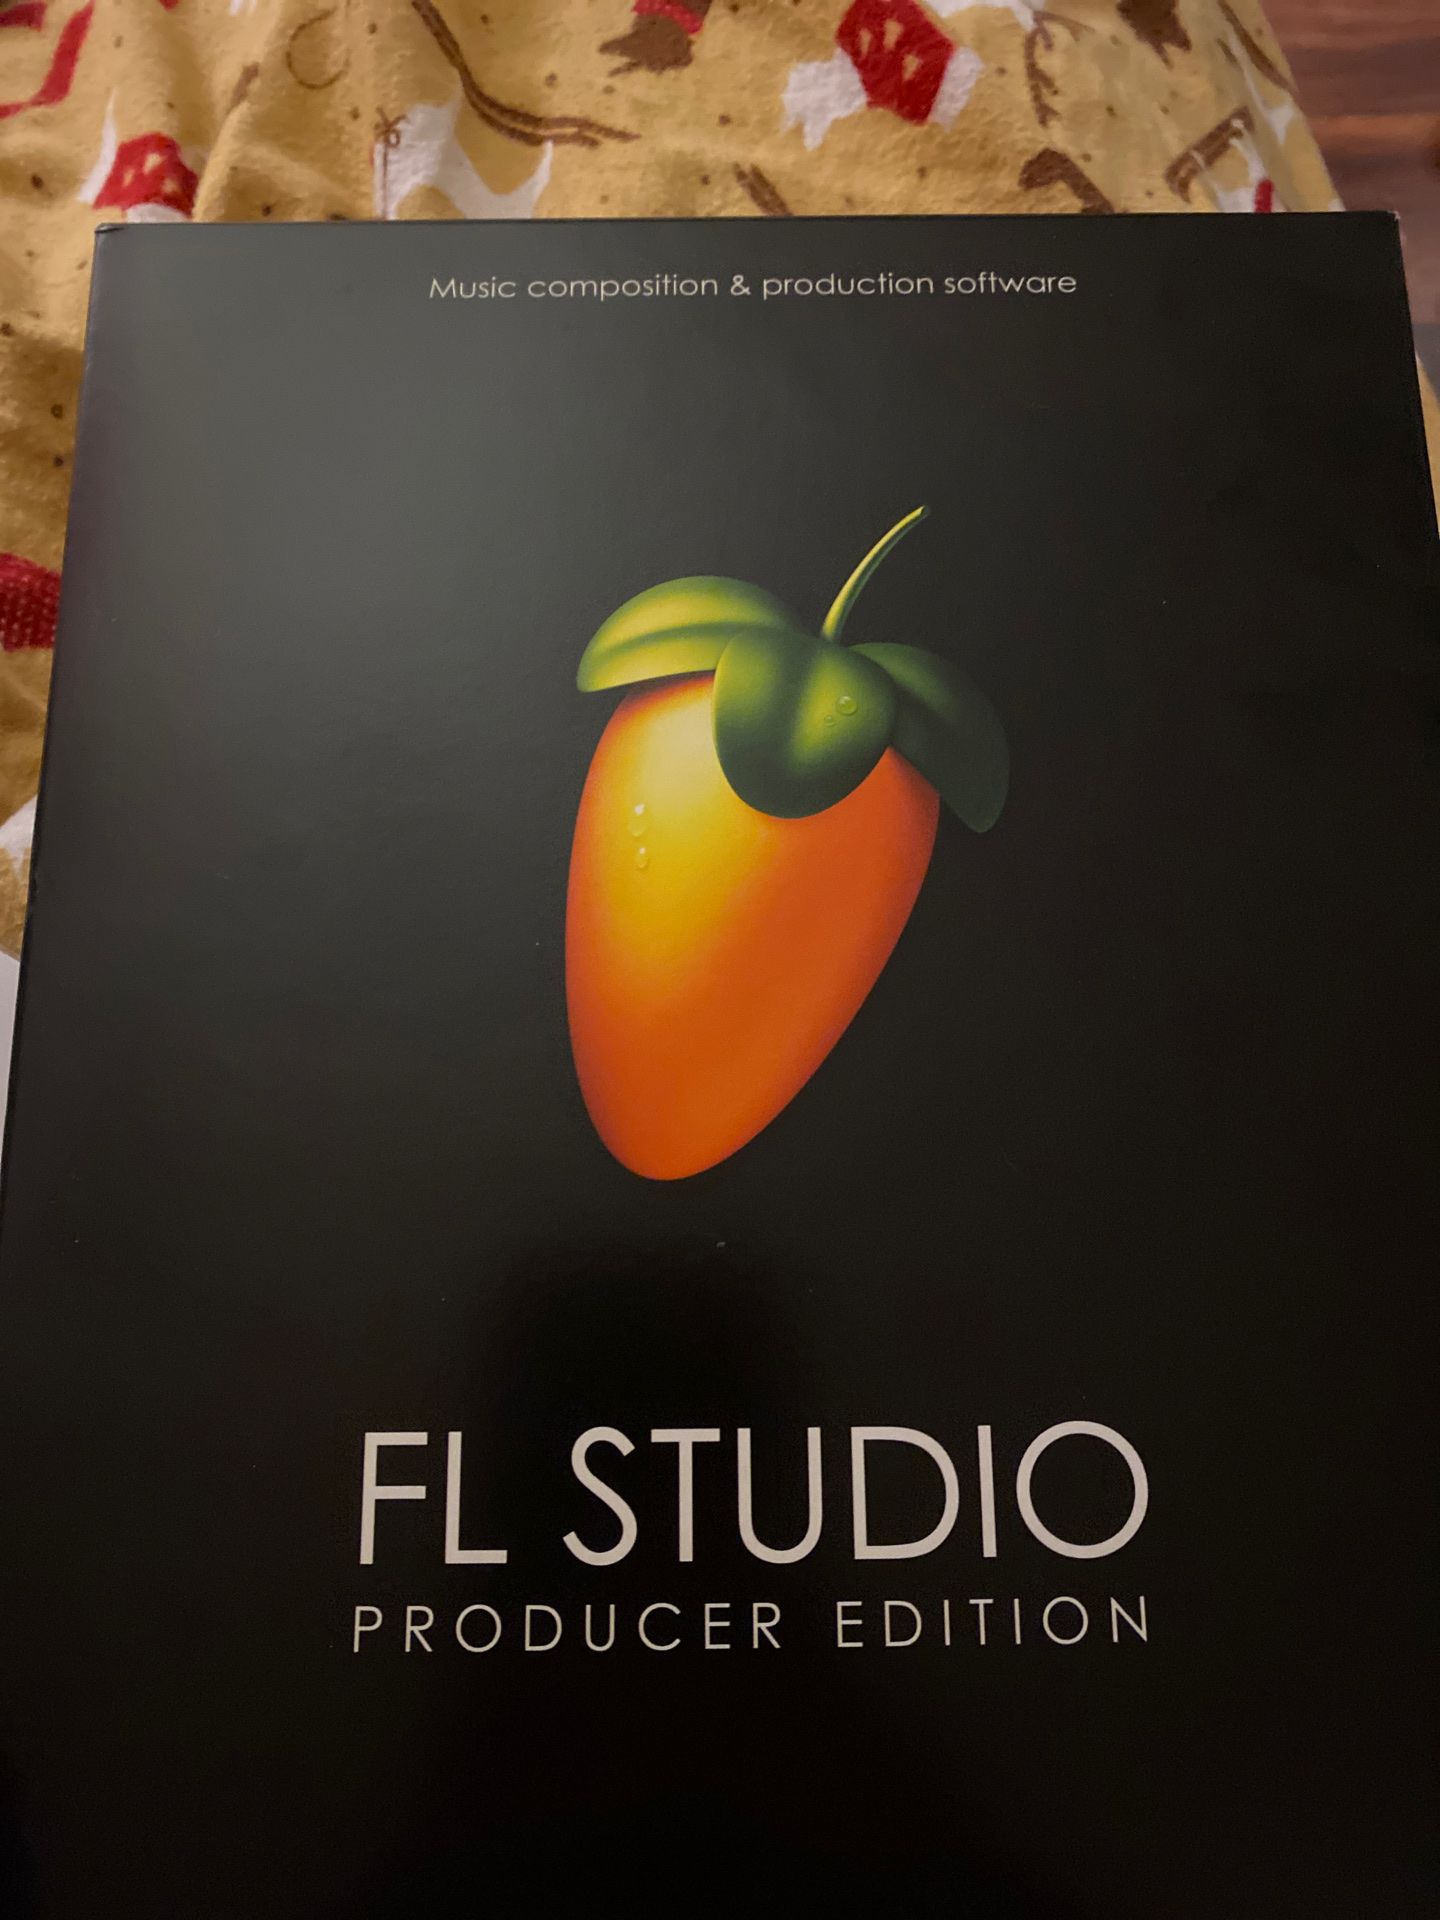 FL STUDIO (fruity loops) REAL INQUIRIES ONLY